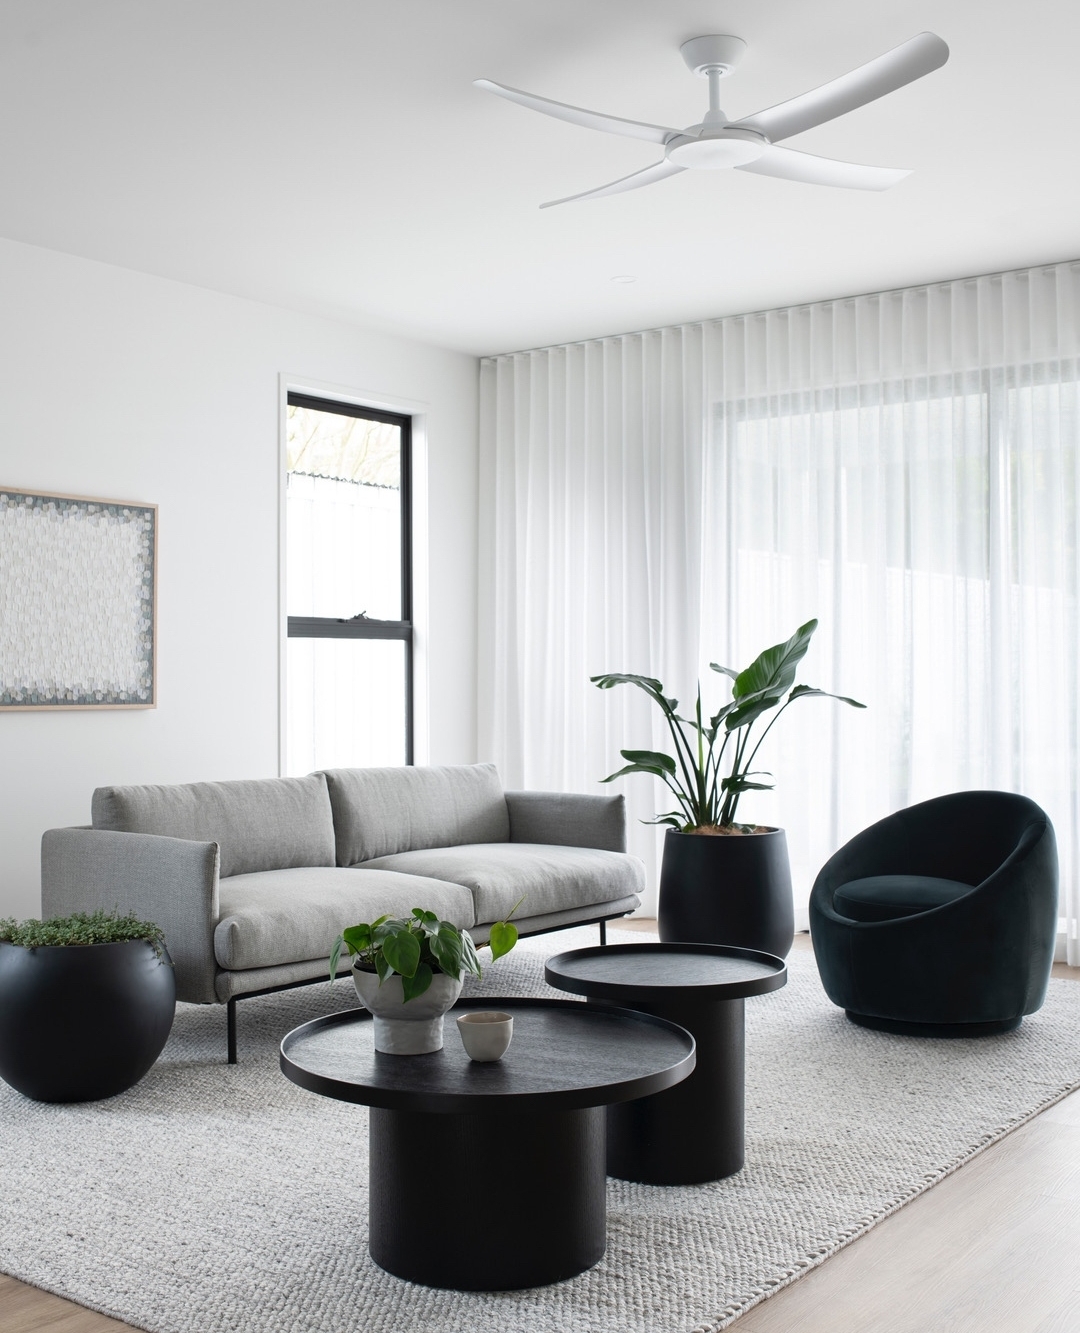 Grey-scale minimalist living room with natural light. Photo by Instagram user @zephyr_and_stone.